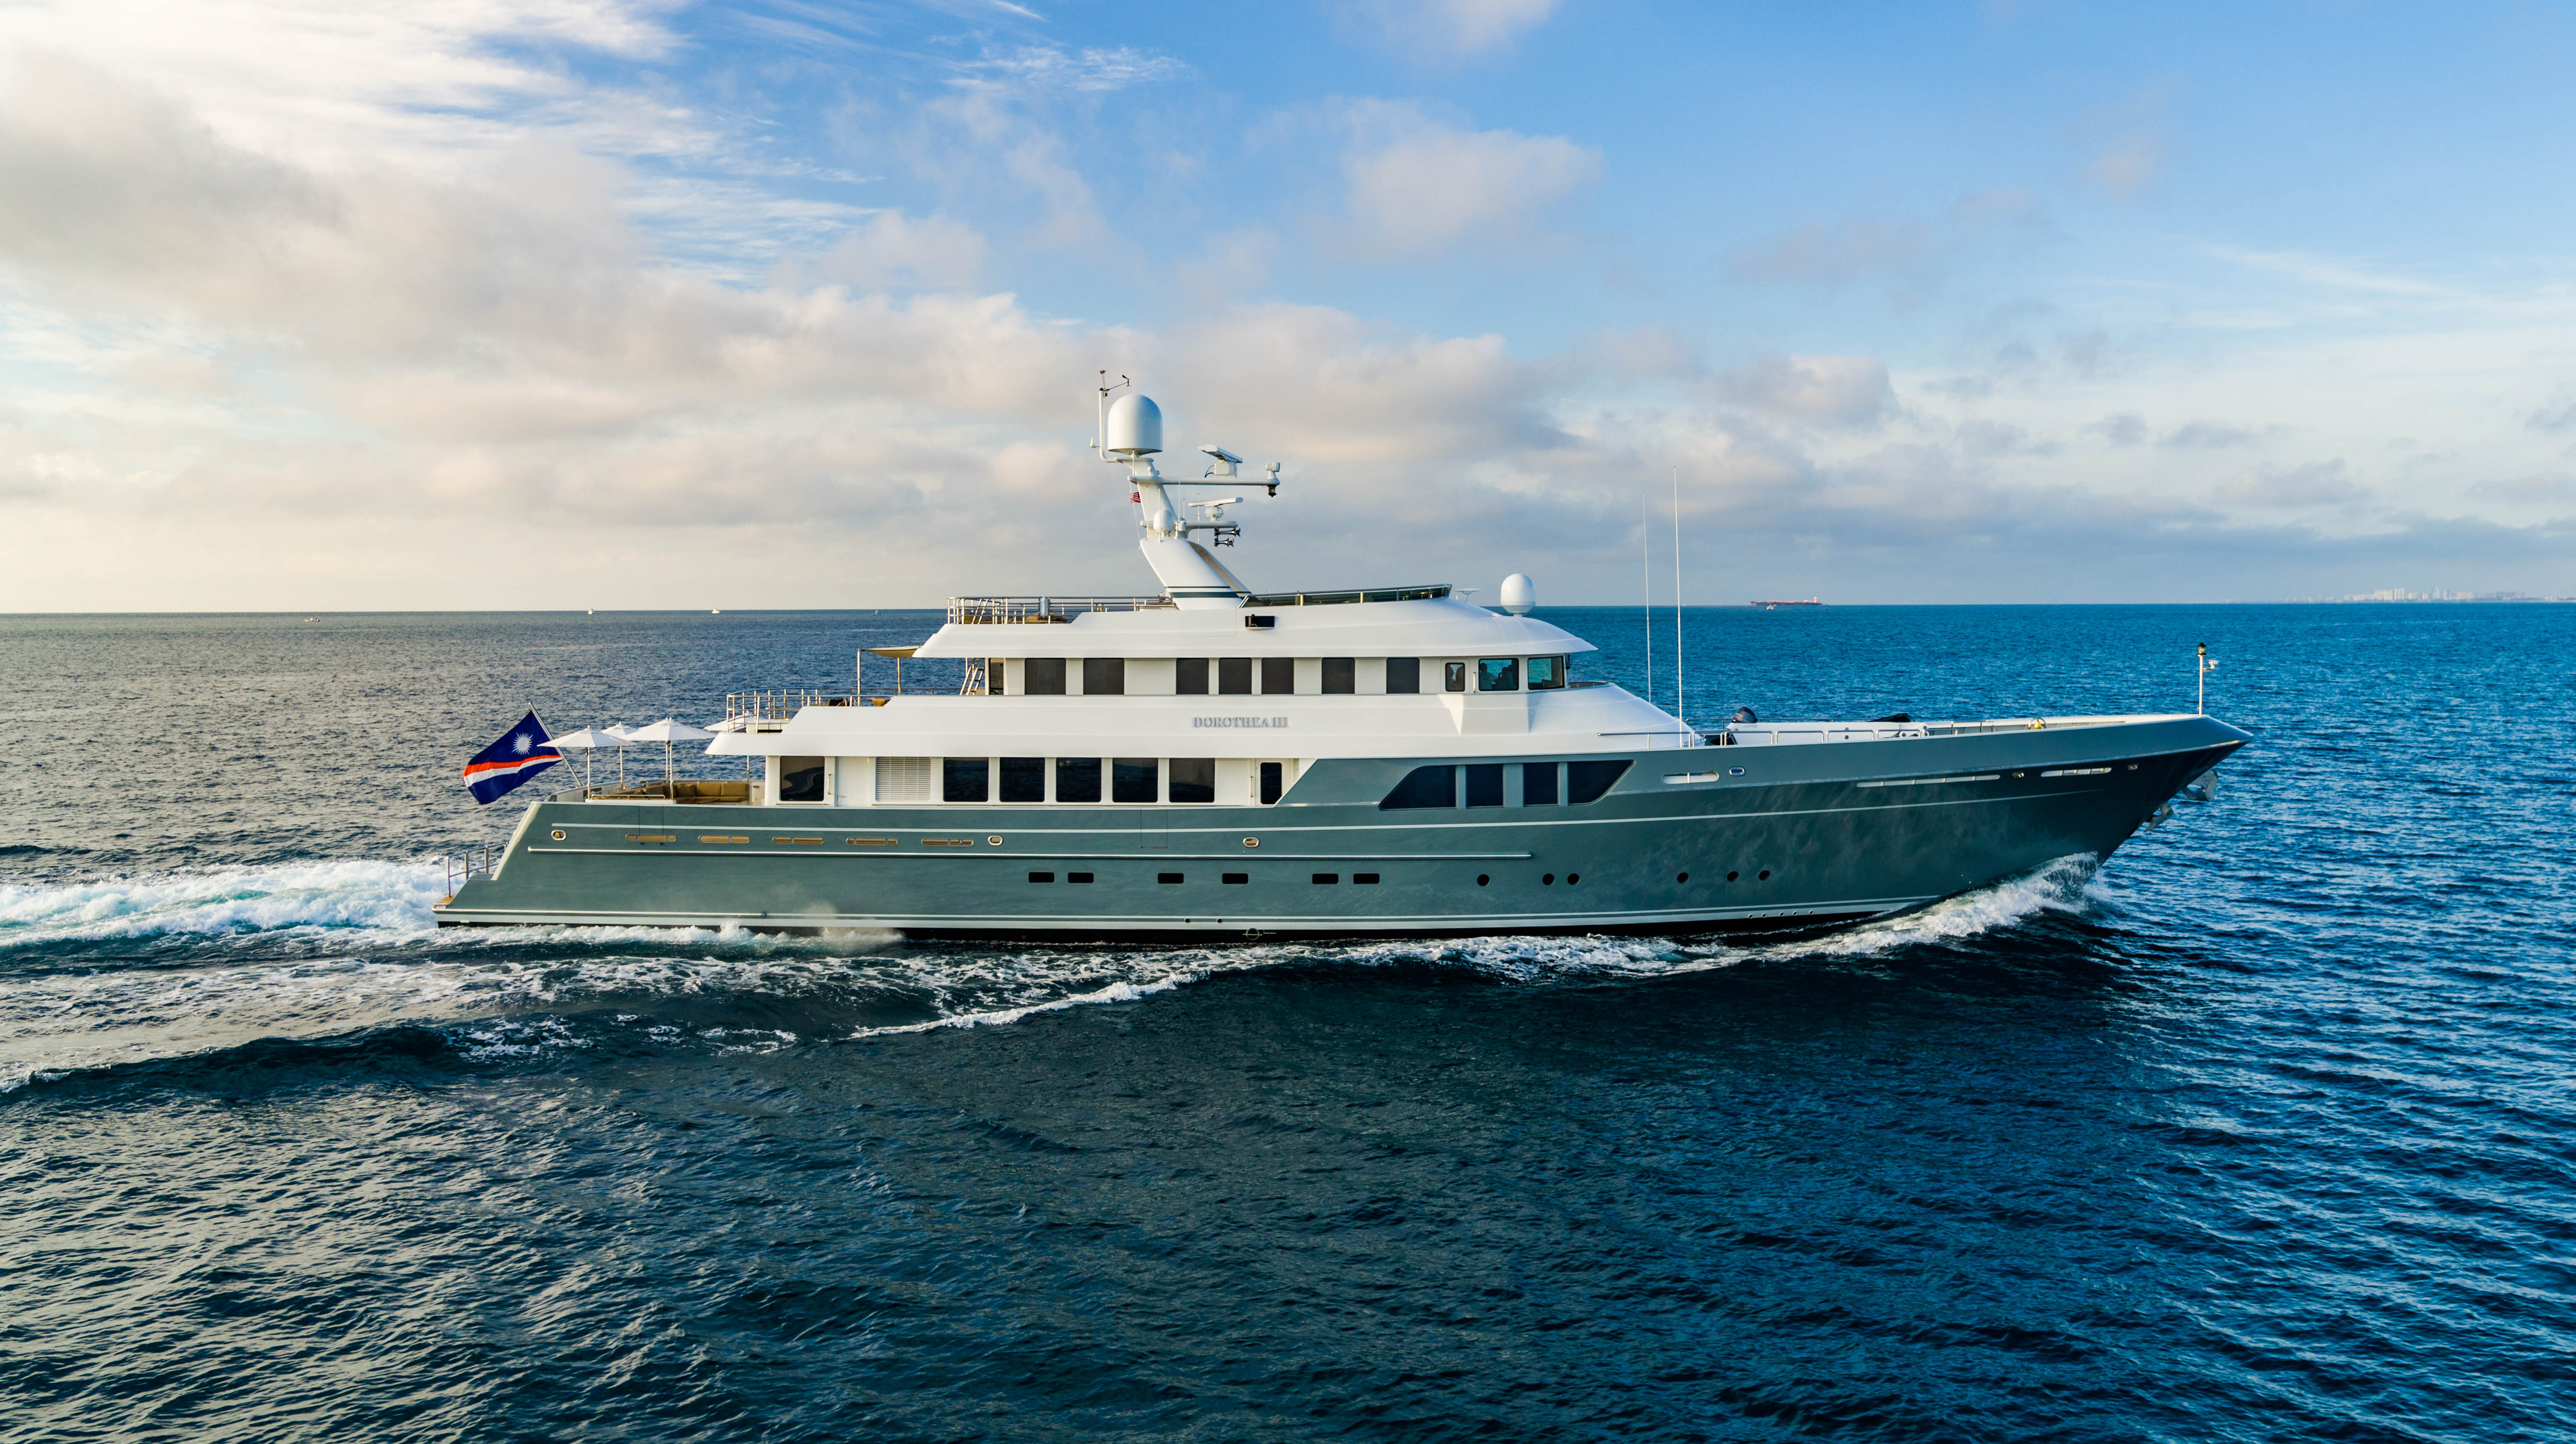 DOROTHEA III specs with detailed specification and builder summary